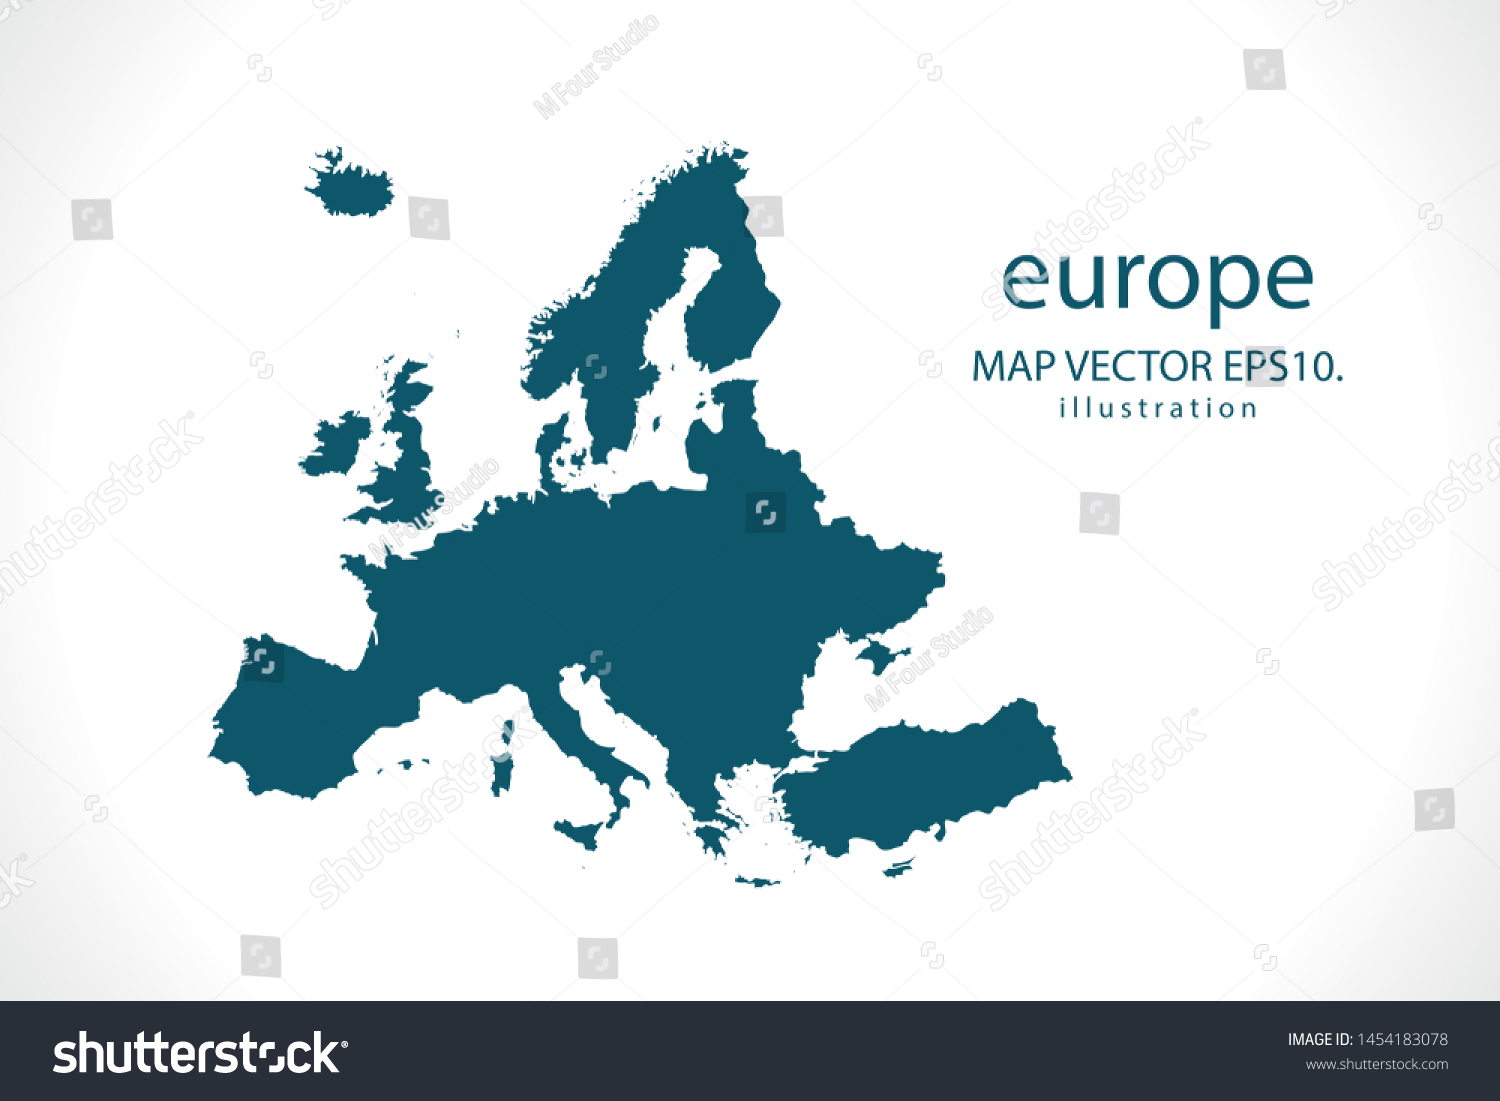 europe map High Detailed on white background. Abstract design vector illustration eps 10 #1454183078